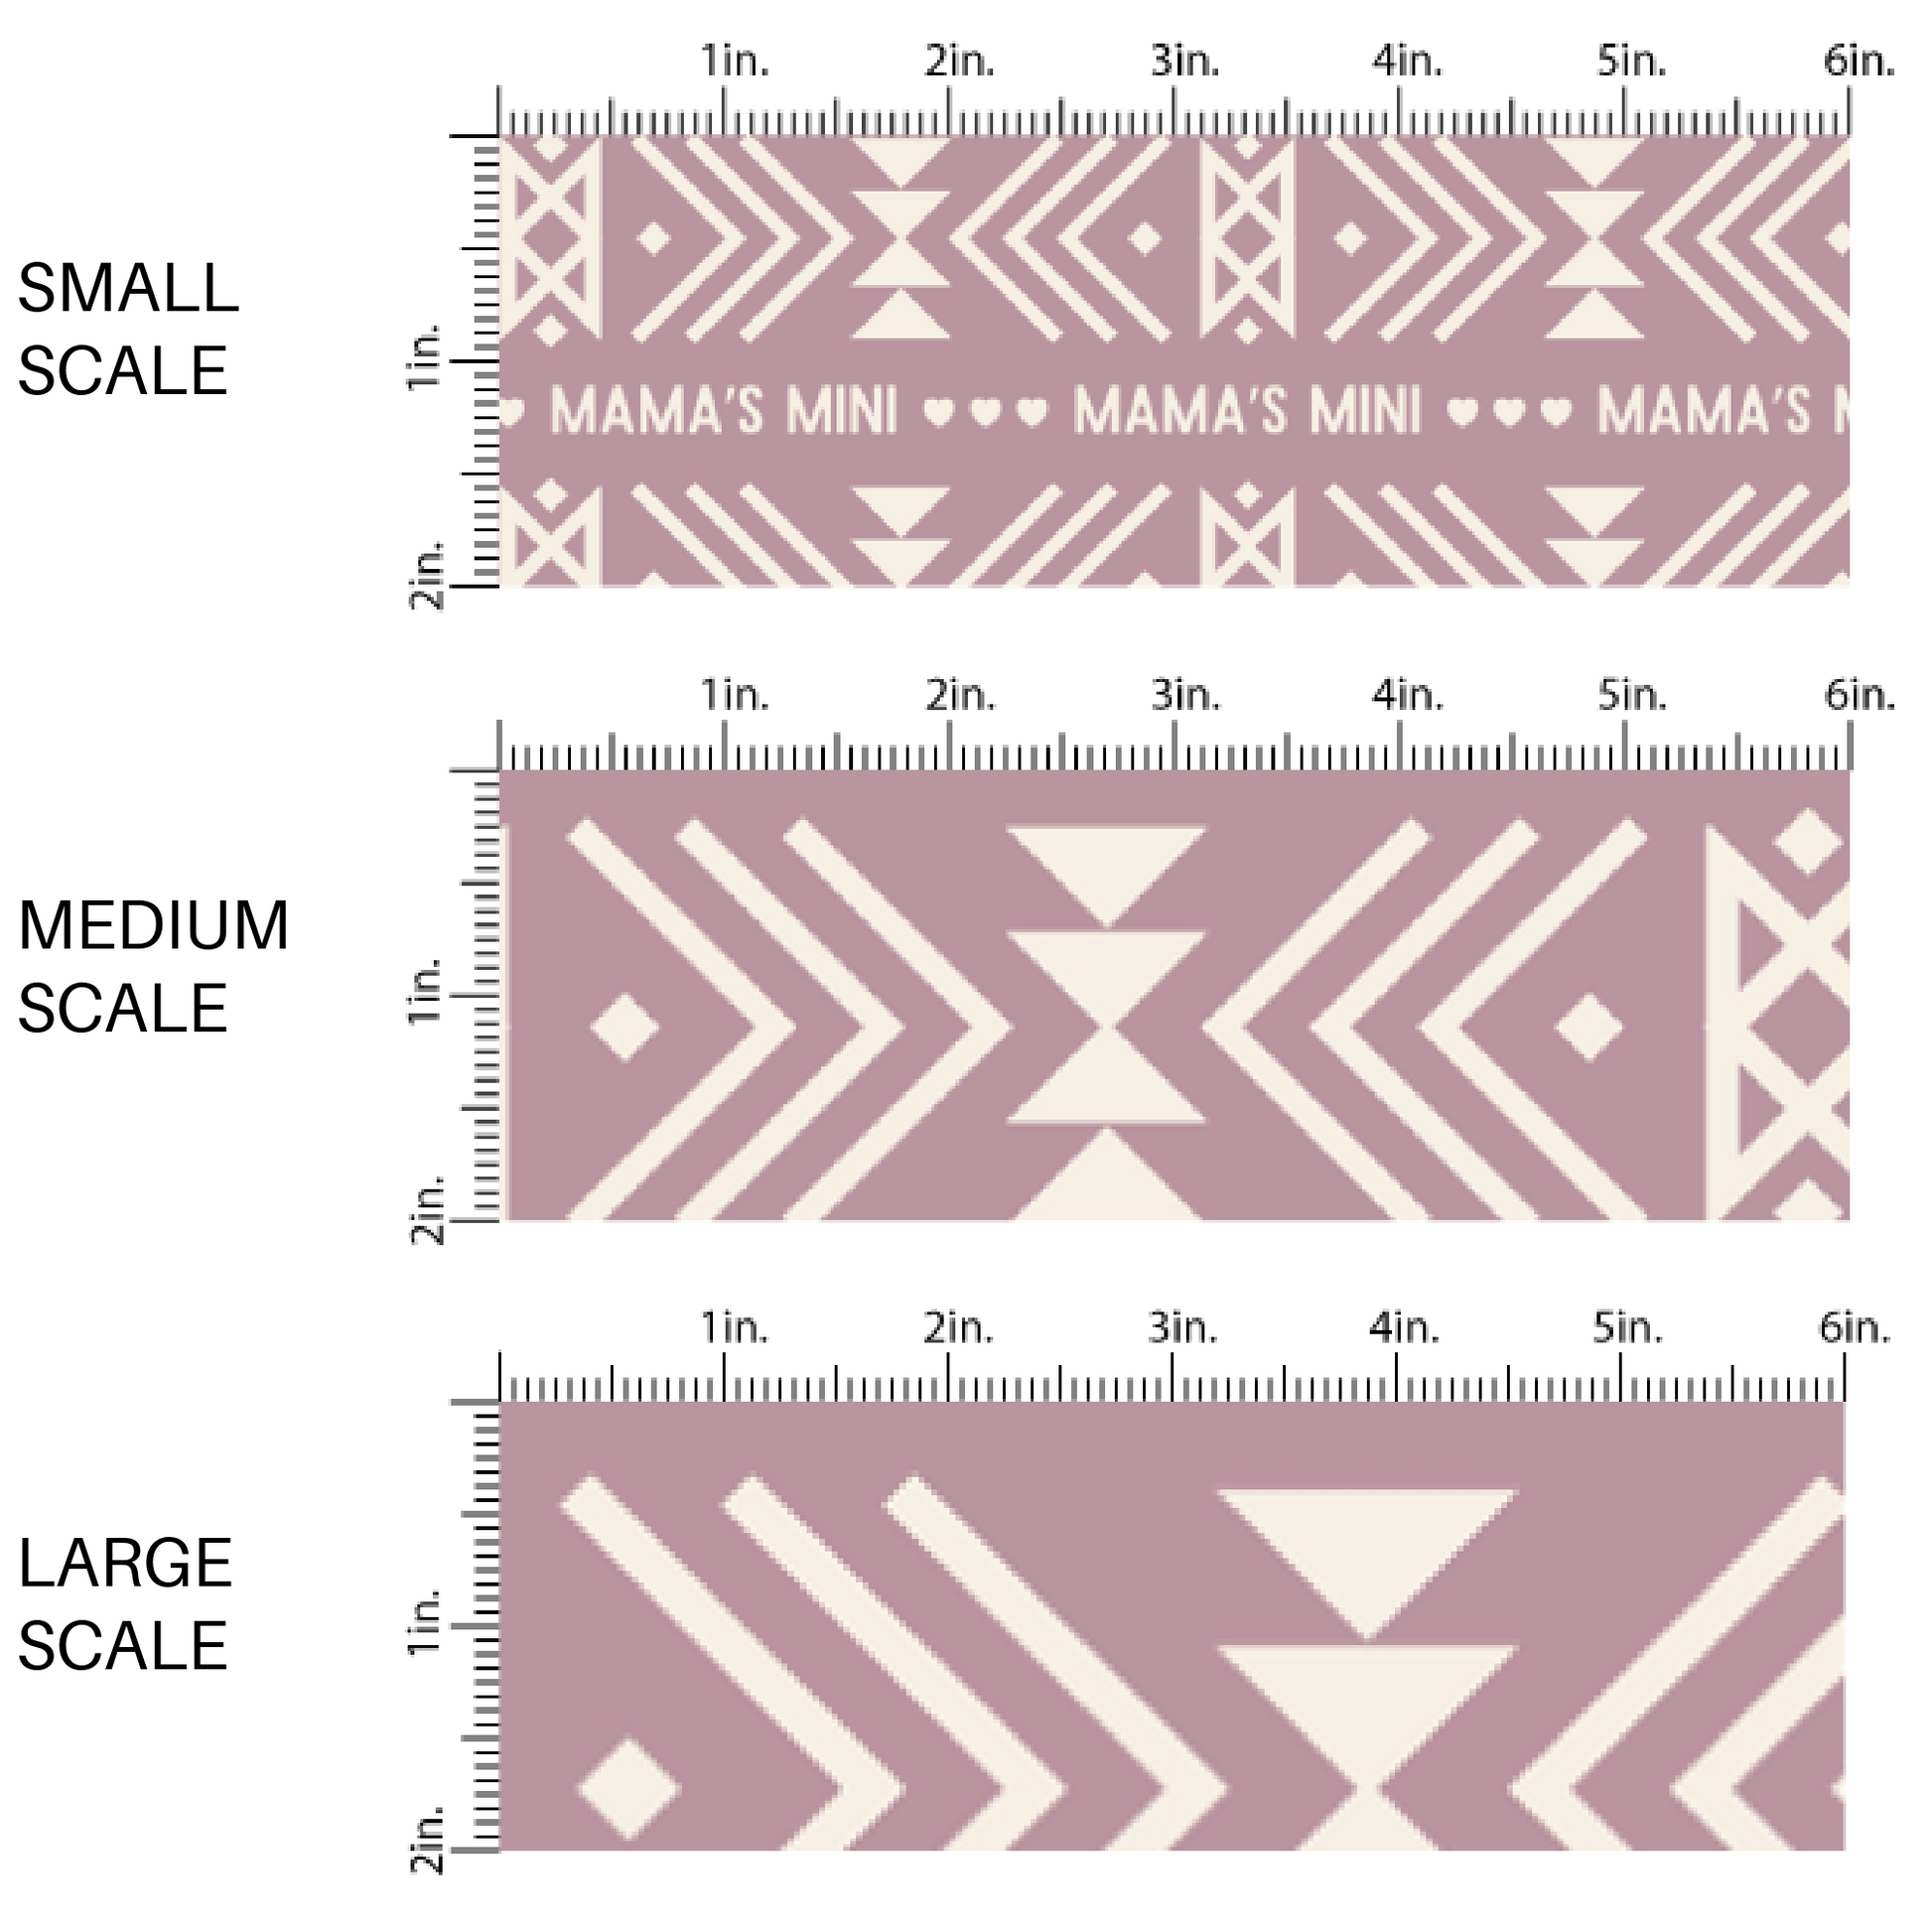 "Mama's Mini" Aztec Print on Purple Fabric by the Yard scaled image guide.